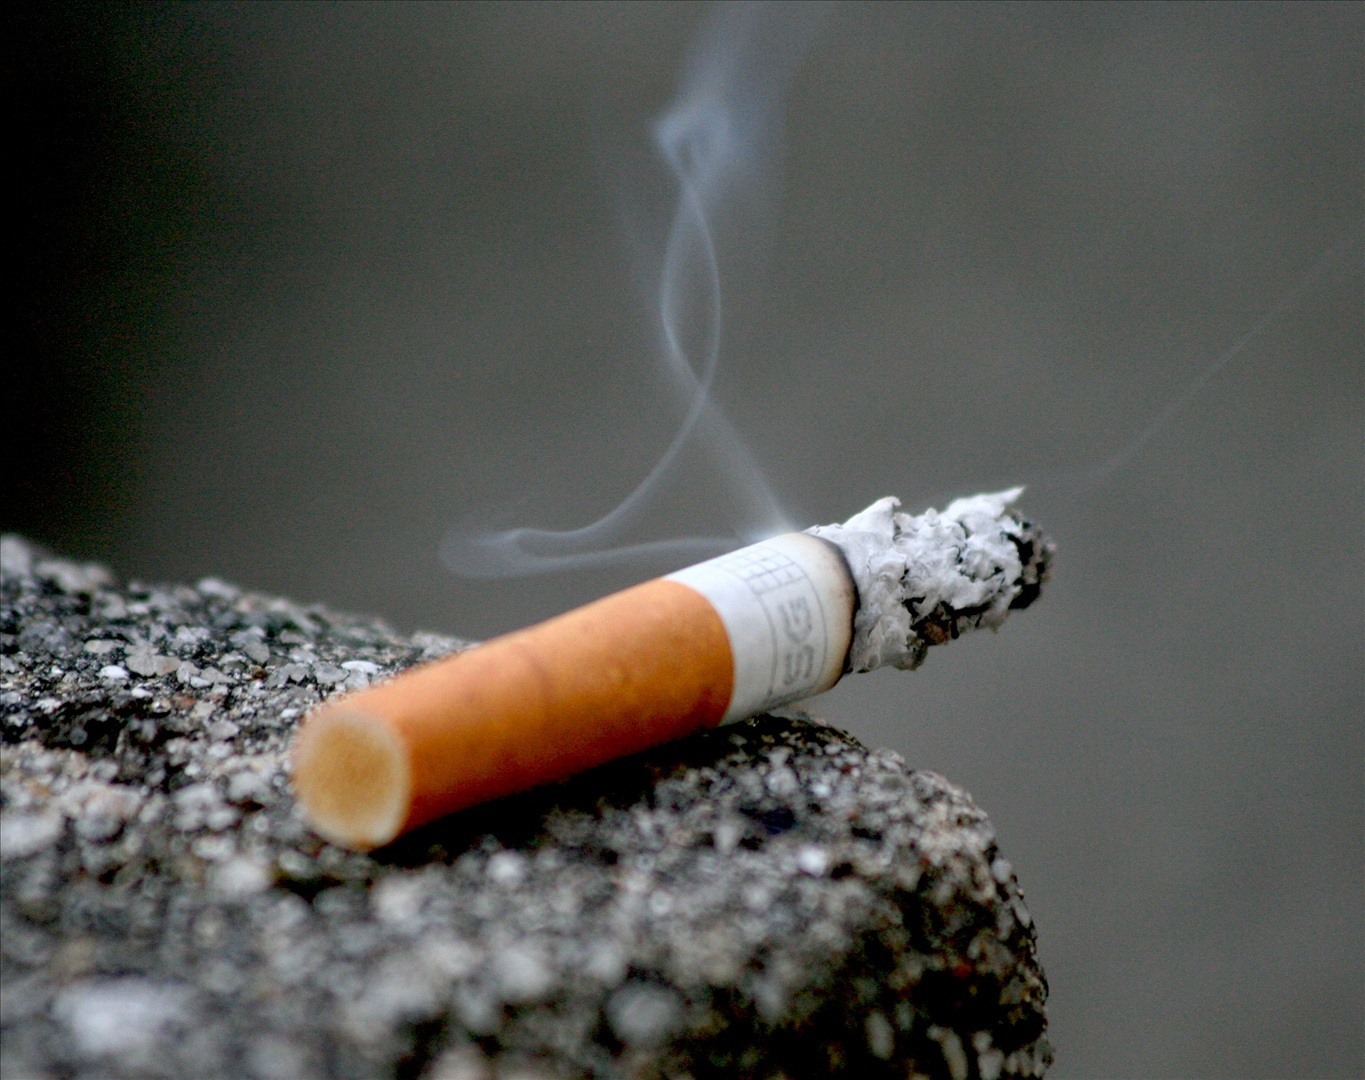 Smokers Employed By State May Soon Have To Pay Surcharge